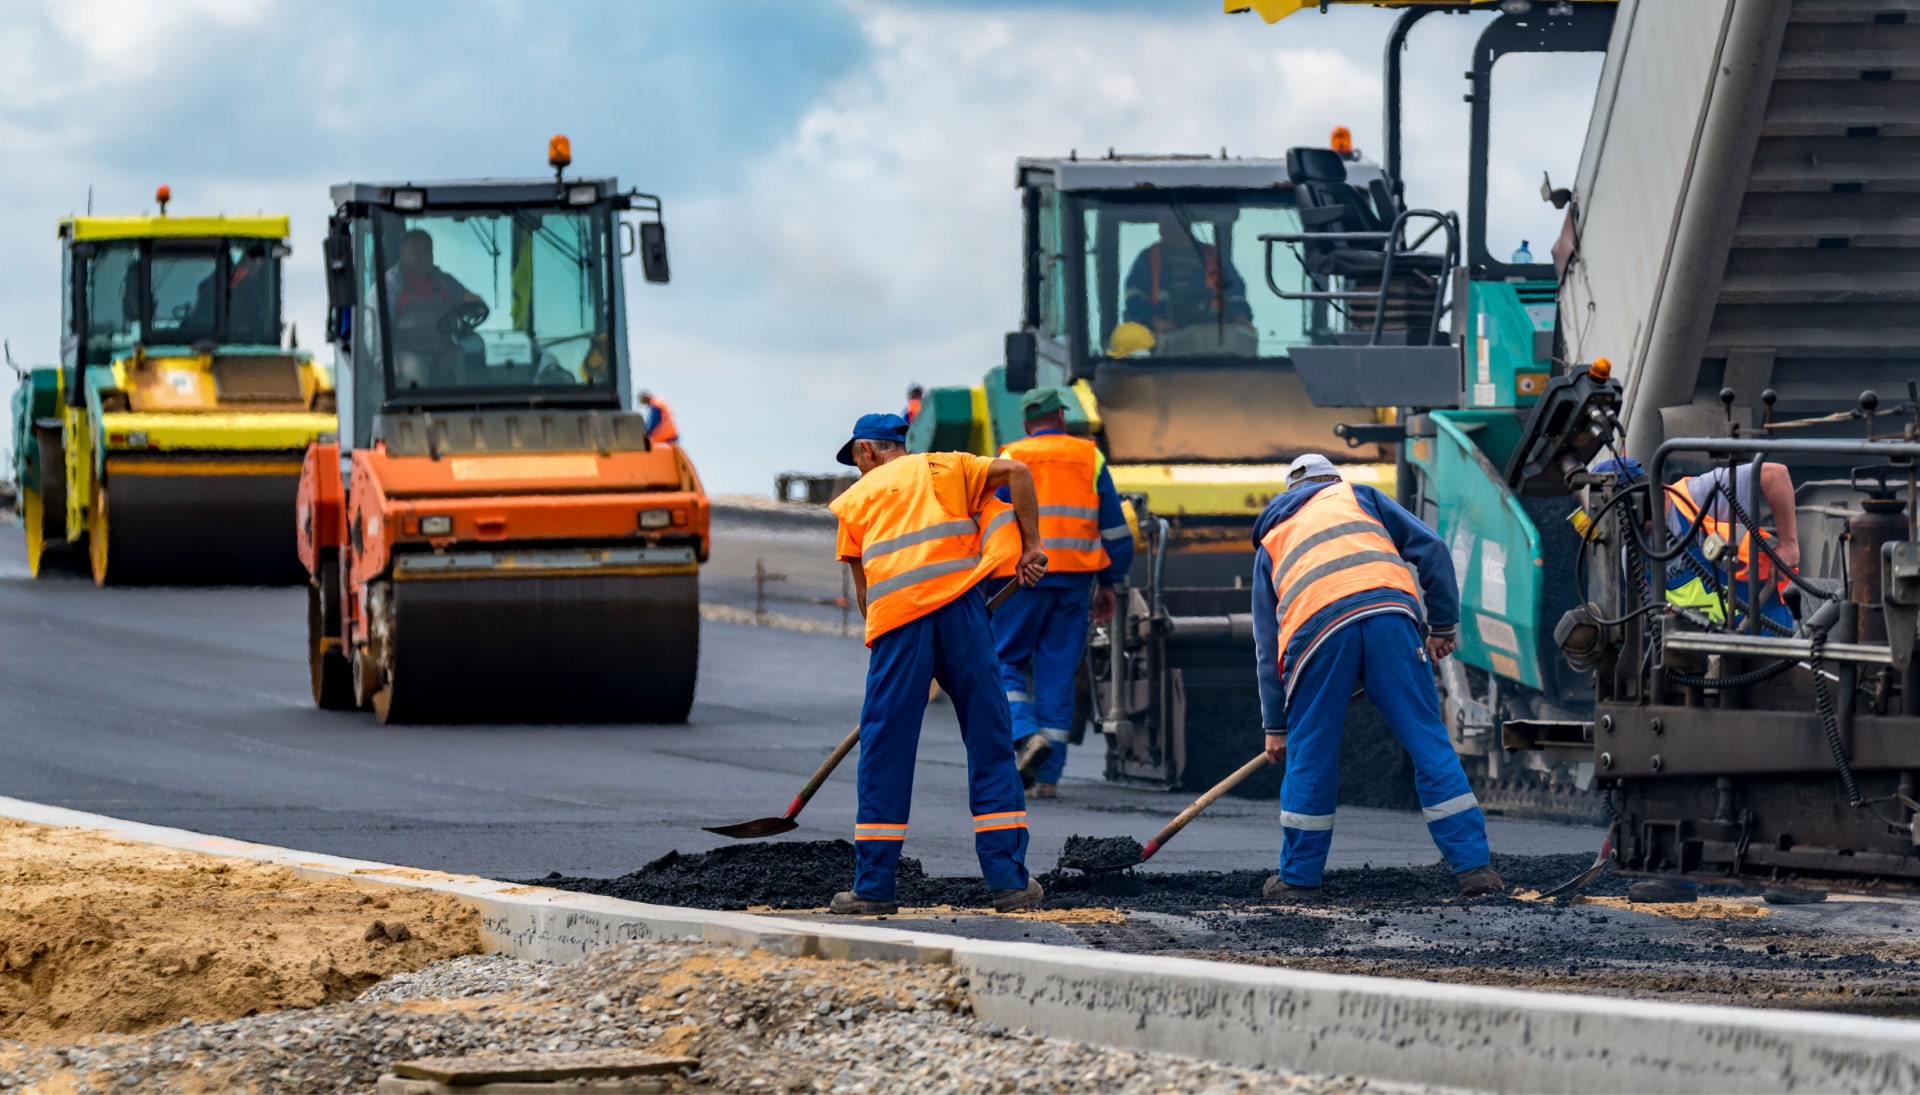 A group of construction workers wearing hard hats and reflective vests, operating heavy machinery and laying down asphalt on a newly excavated road in Peoria, showcasing the intricate process of building a sturdy and smooth surface.